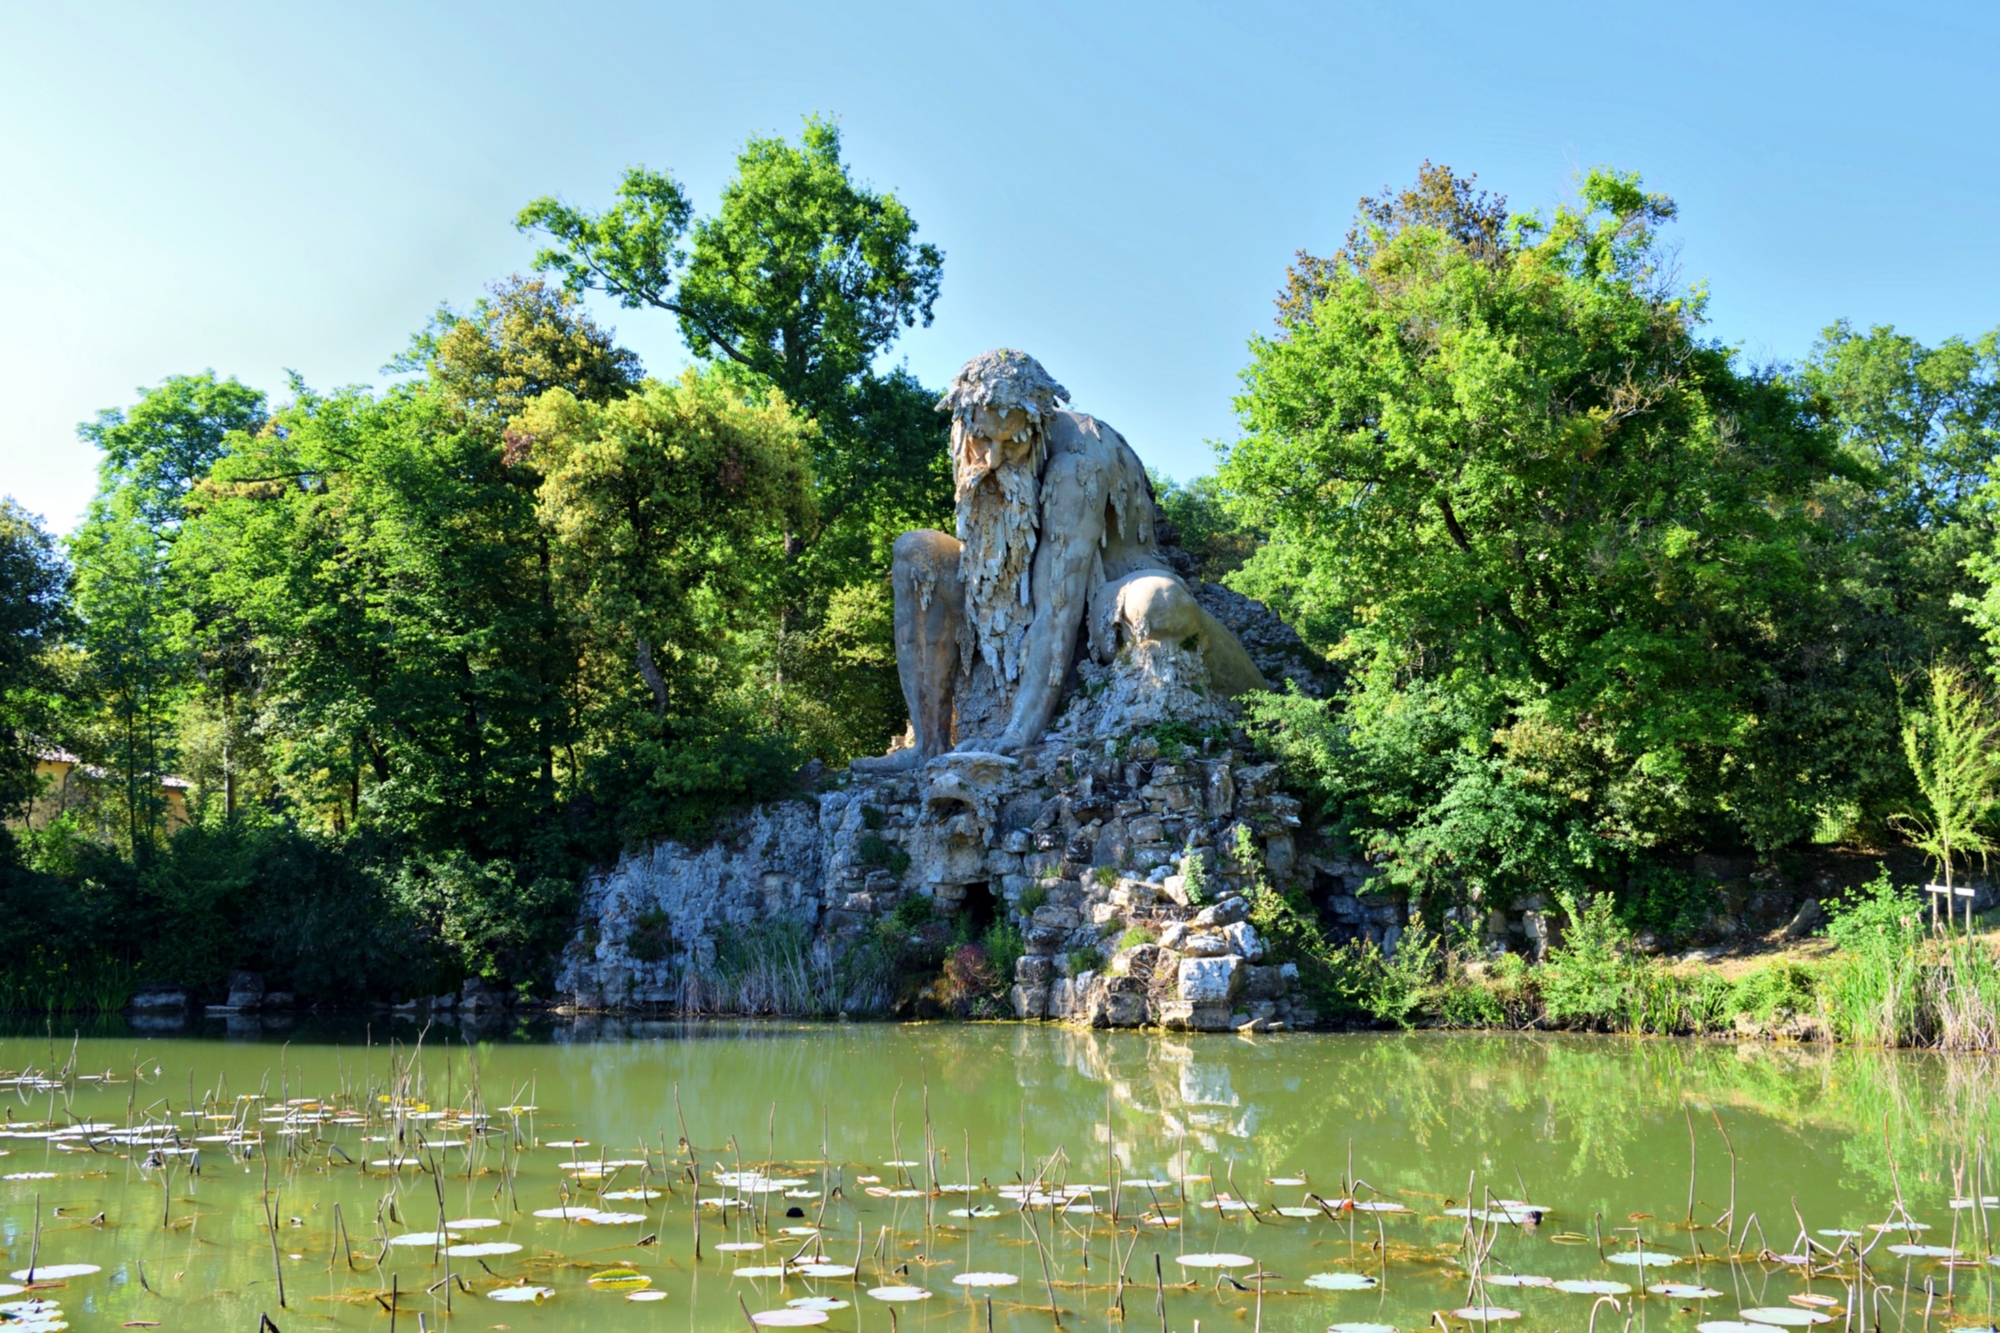 The Appennine Colossus by Giambologna, a sculpture located in Florence, in the park at Villa Demidoff